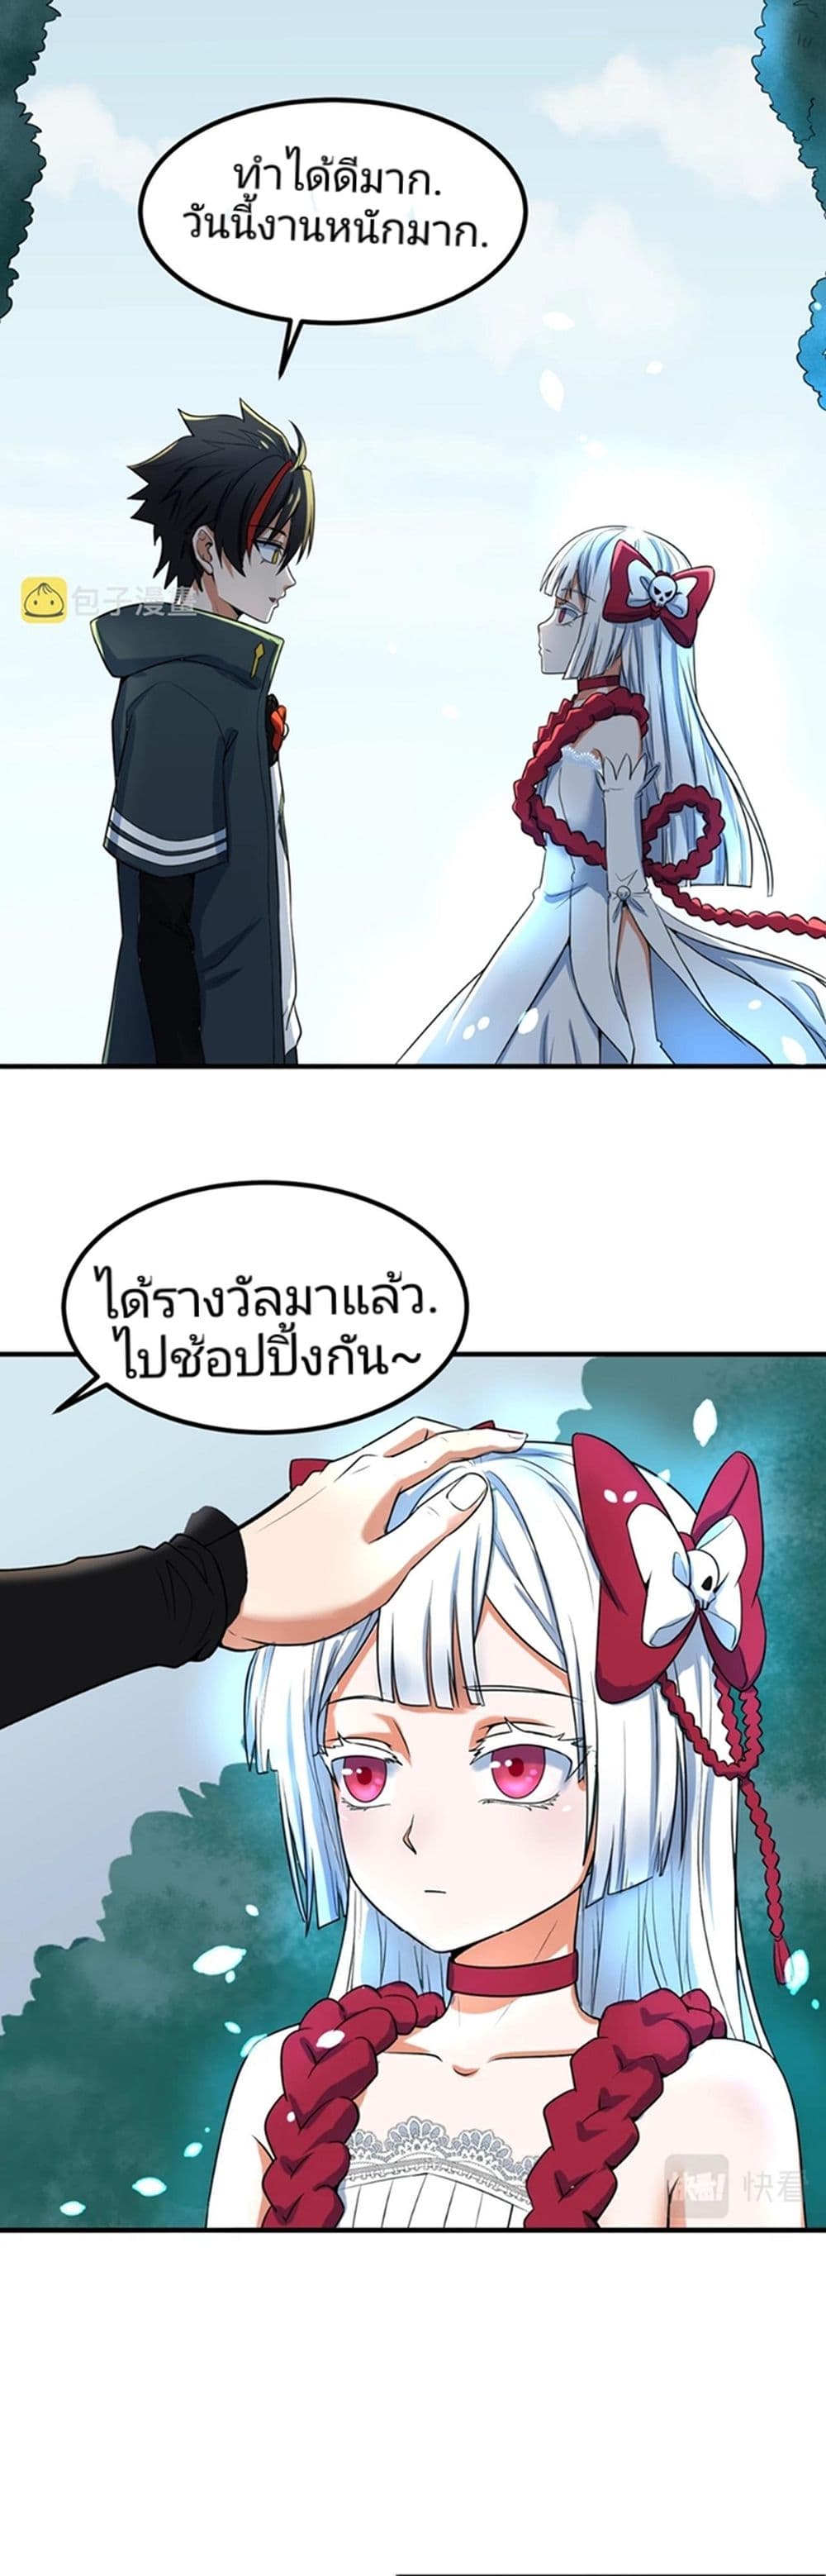 The Age of Ghost Spirits à¸à¸­à¸à¸à¸µà¹ 5 (53)